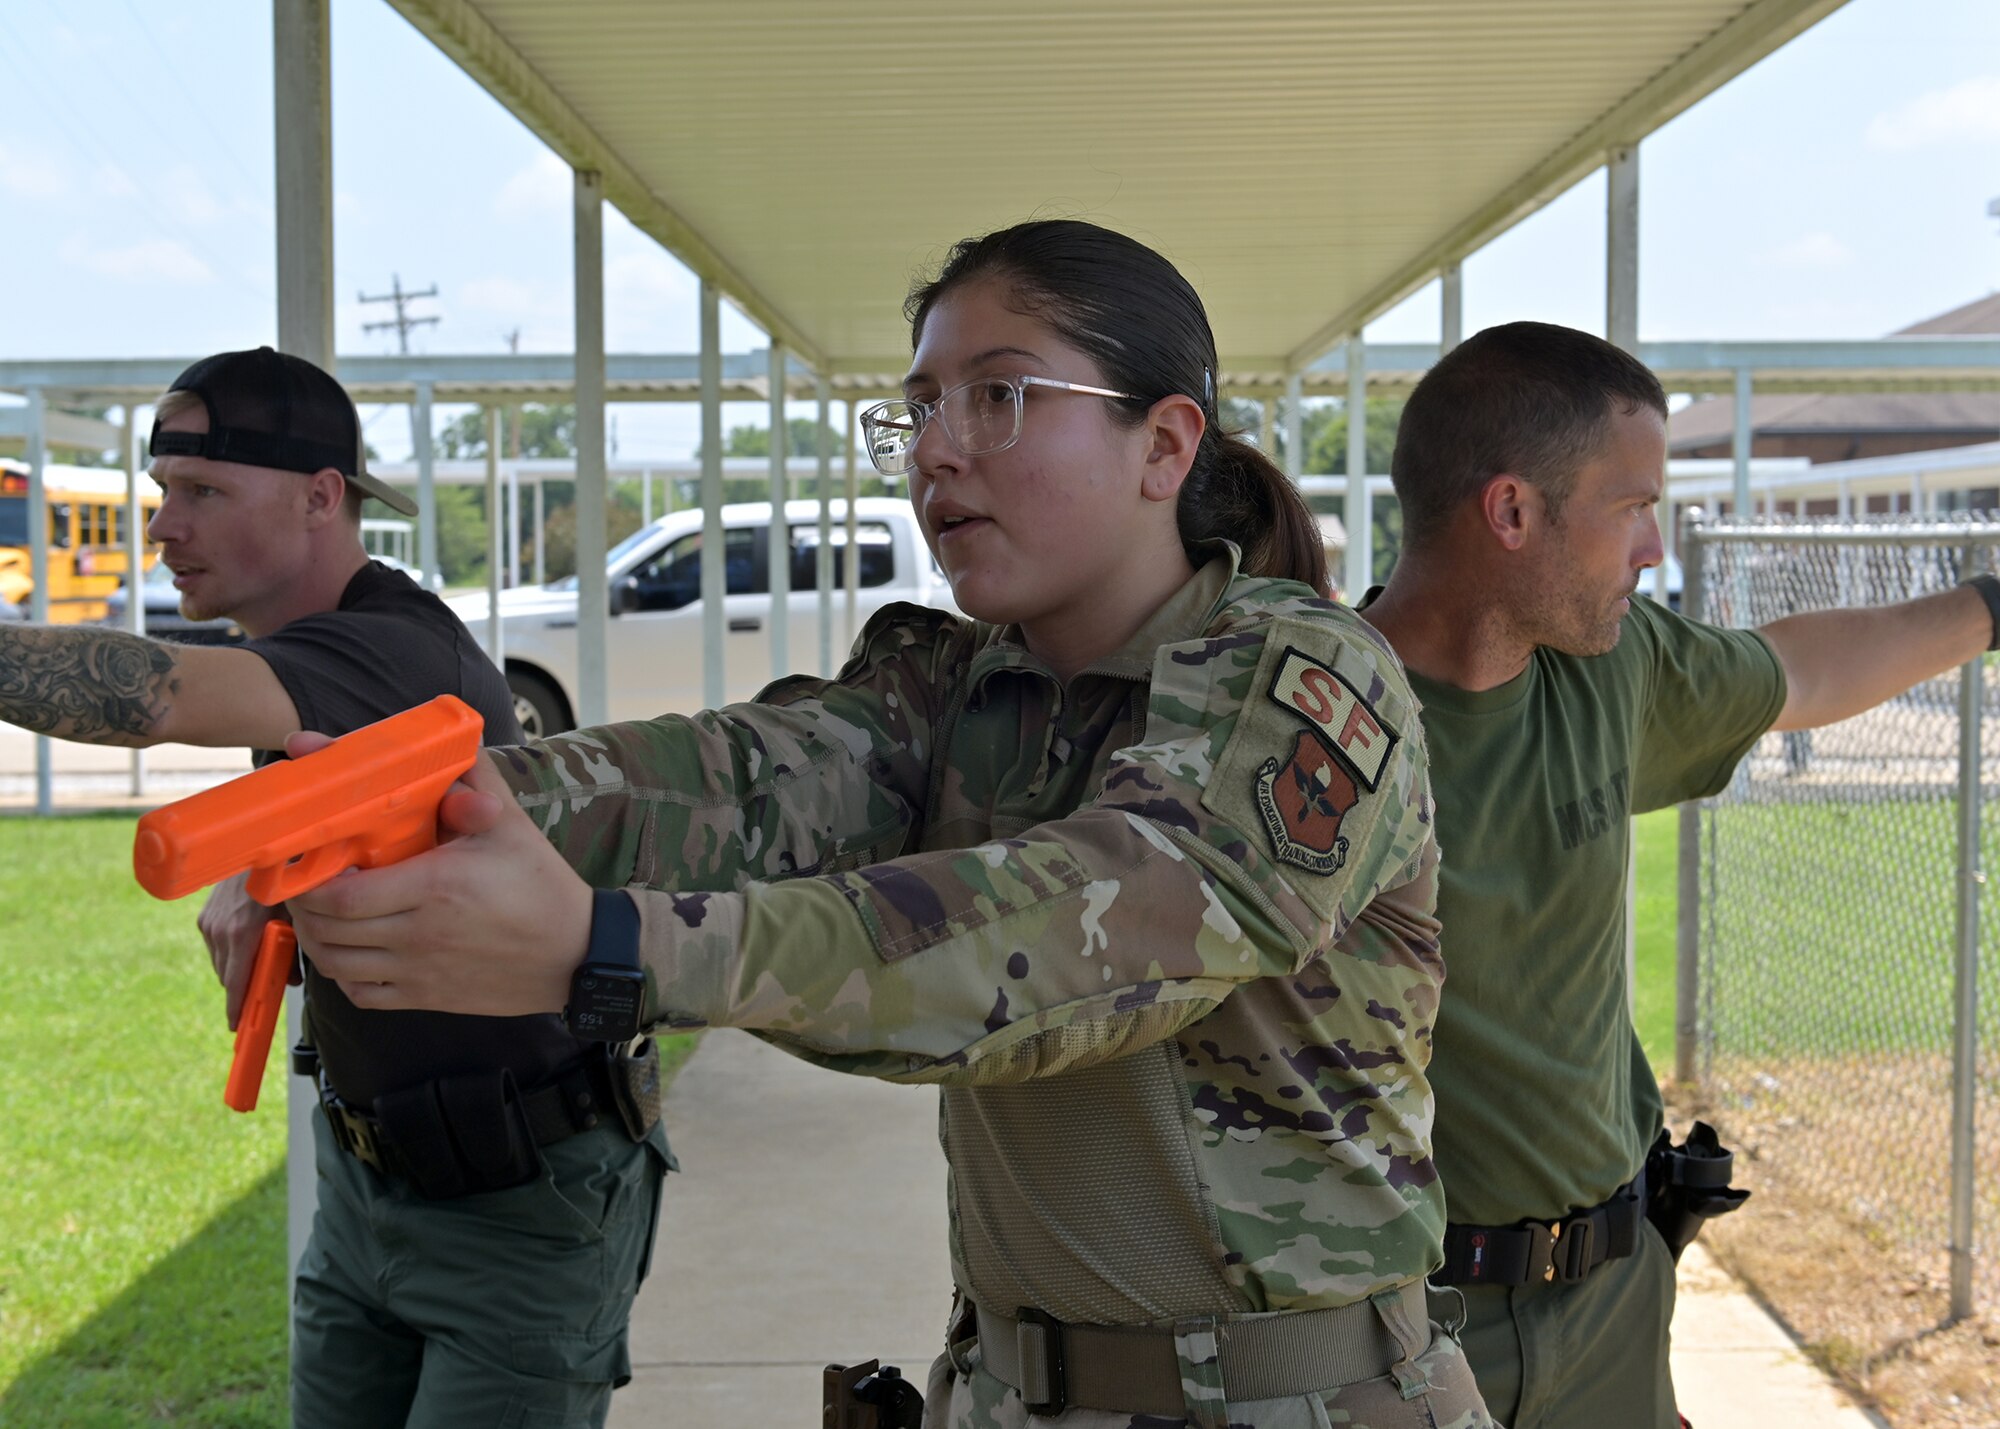 Airman Leidy Zarate, 14th Security Forces Patrolman, approaches the main entrance of the Smithville High School facility.